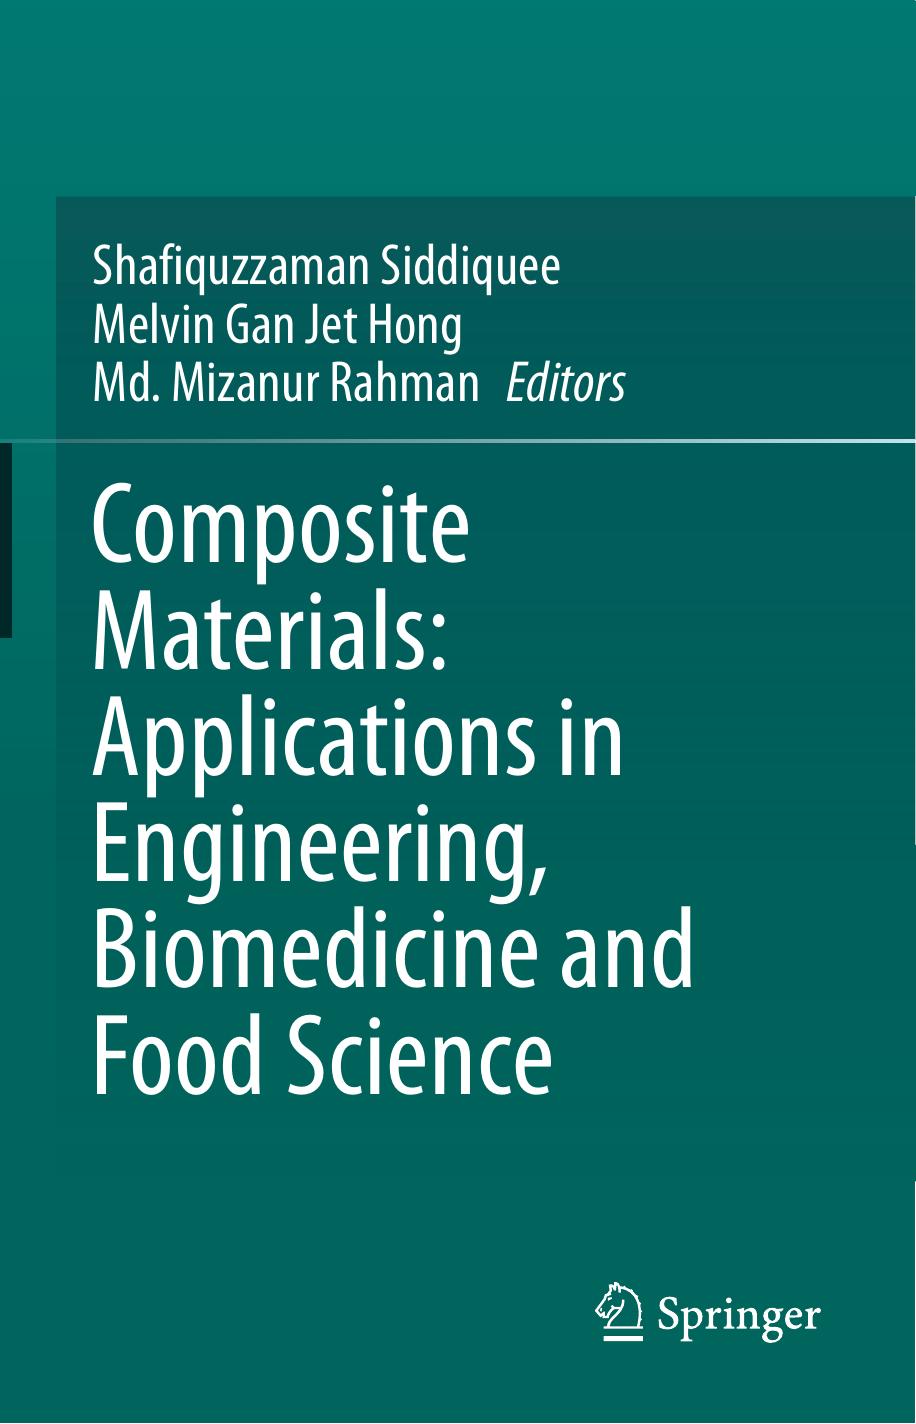 Composite Materials  Applications in Engineering, Biomedicine and Food Science-Springer International Publishing Springer (2020)